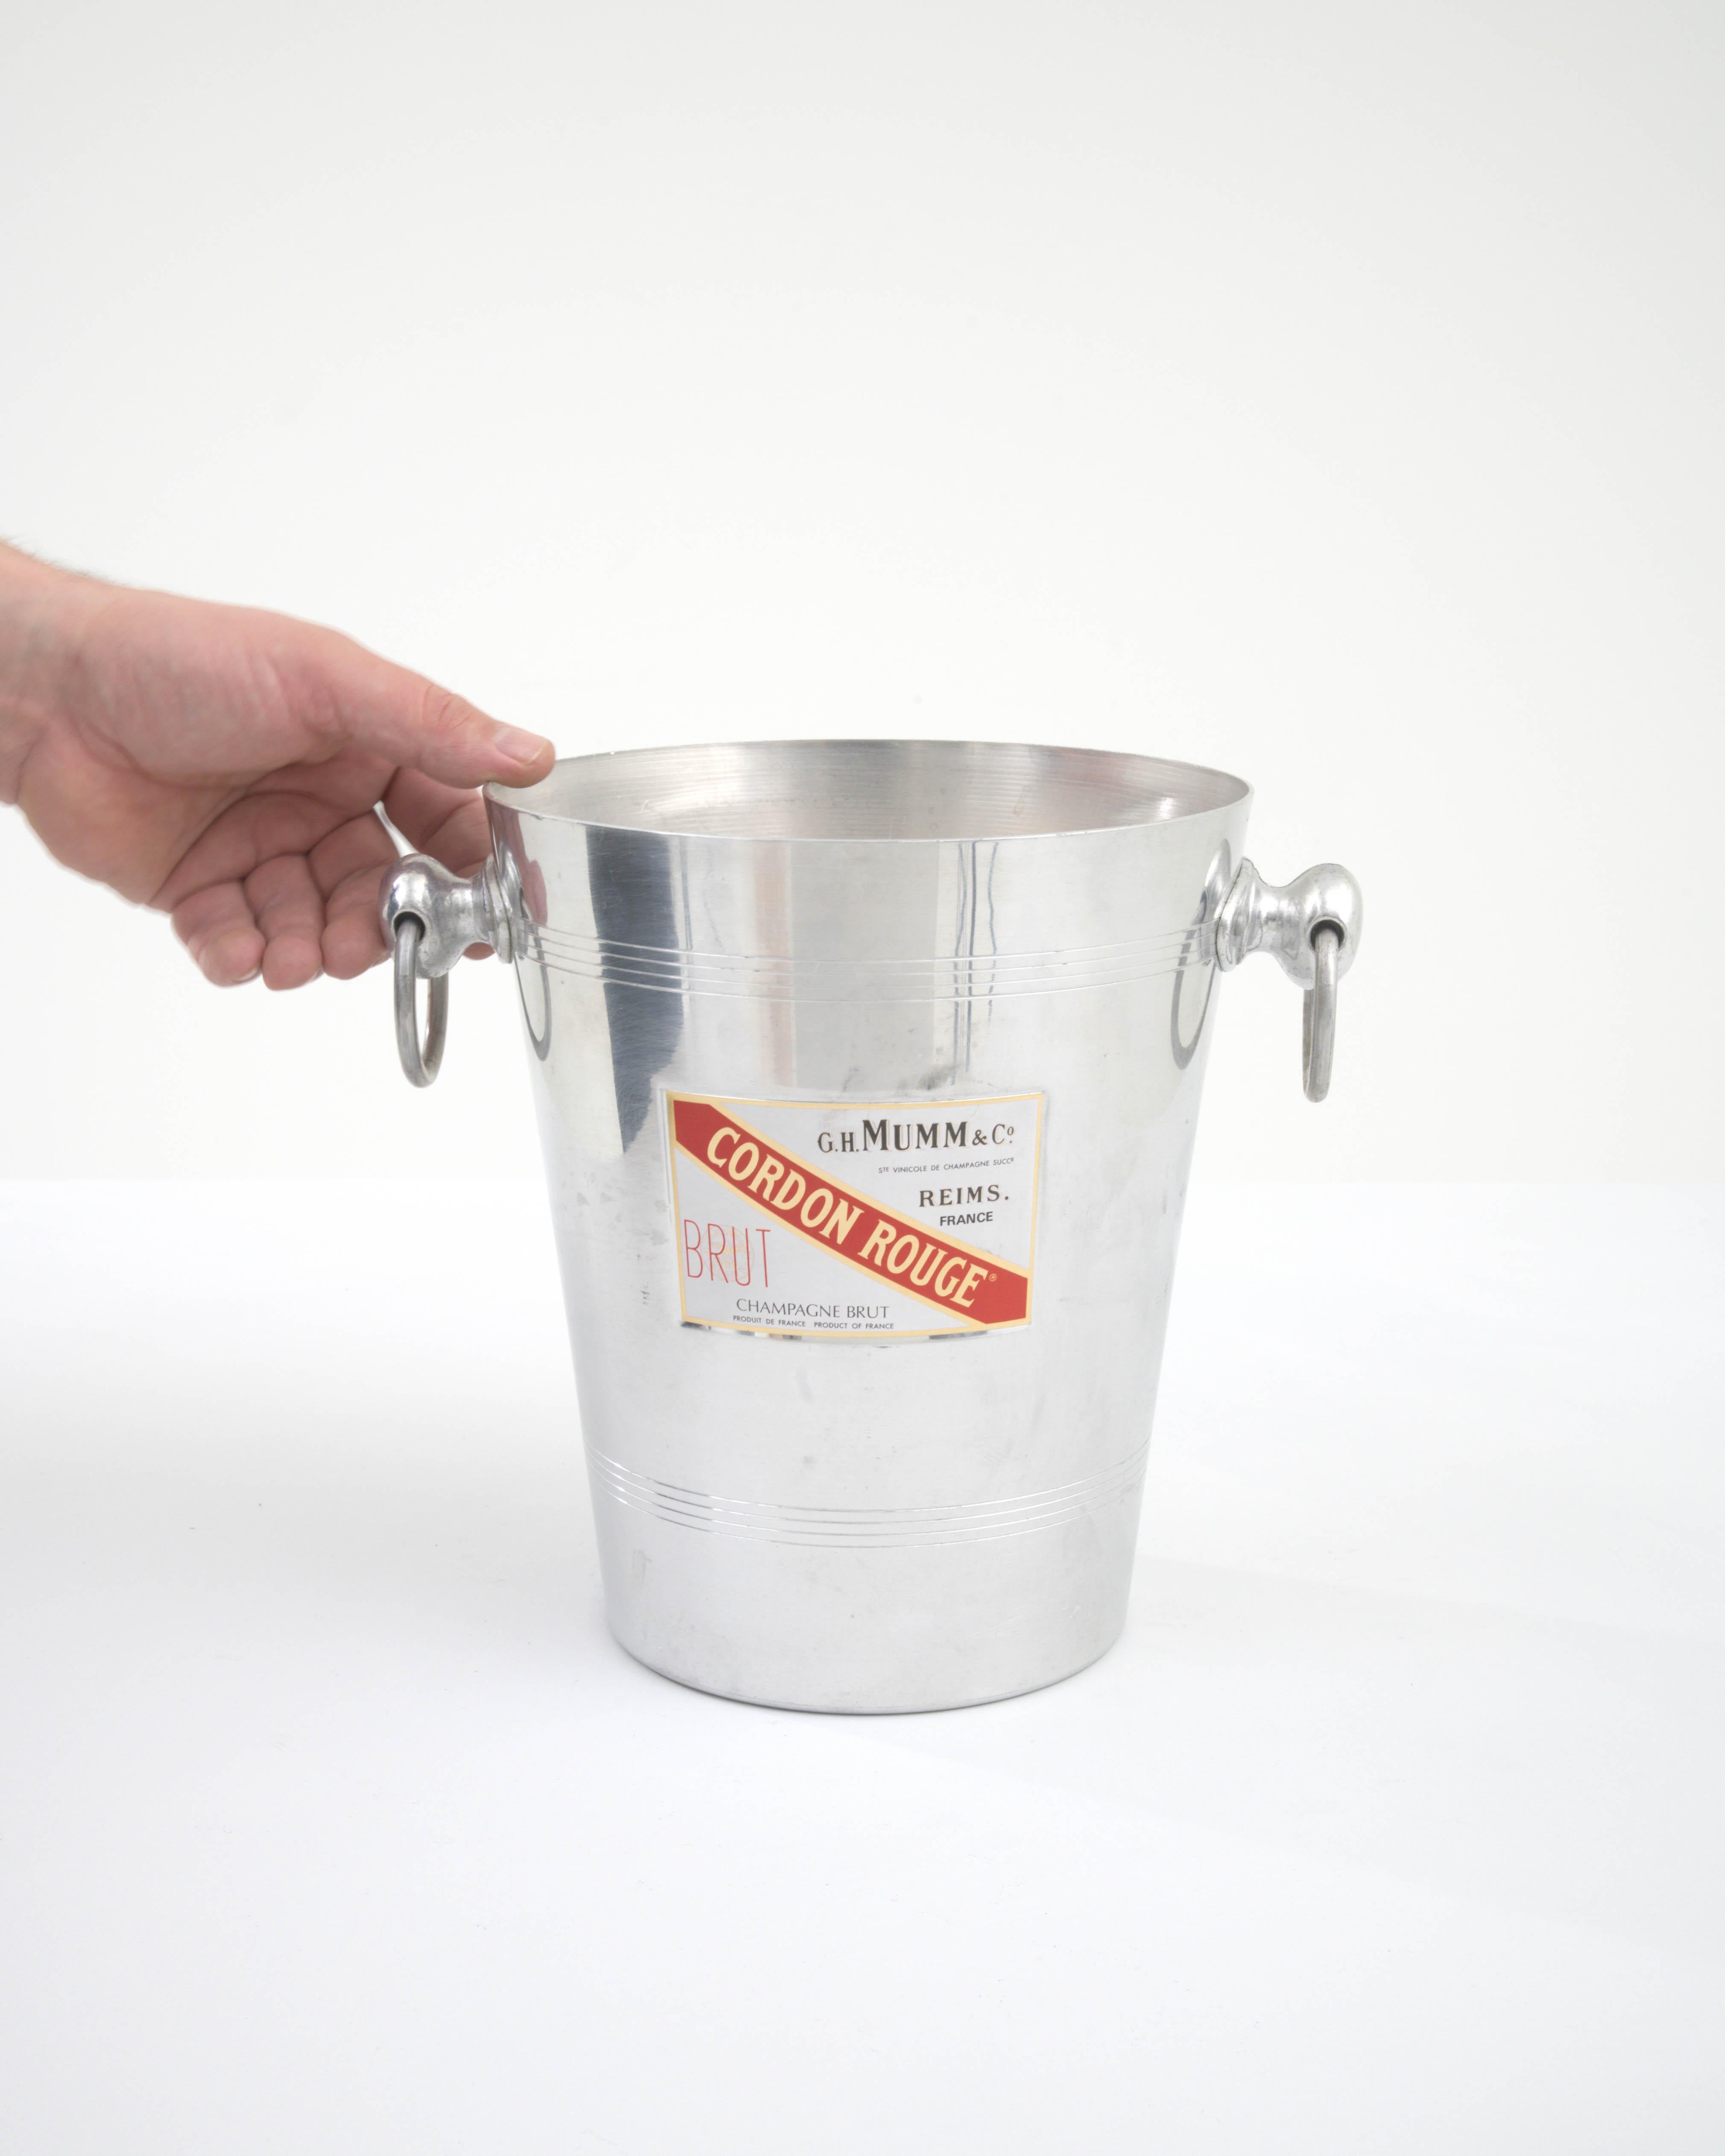 Presenting the 20th Century French Metal Ice Bucket, a piece imbued with the spirit of celebration and sophistication. As you entertain, let the iconic G.H. MUMM & Cie label - synonymous with exceptional champagne - be your partner in setting a